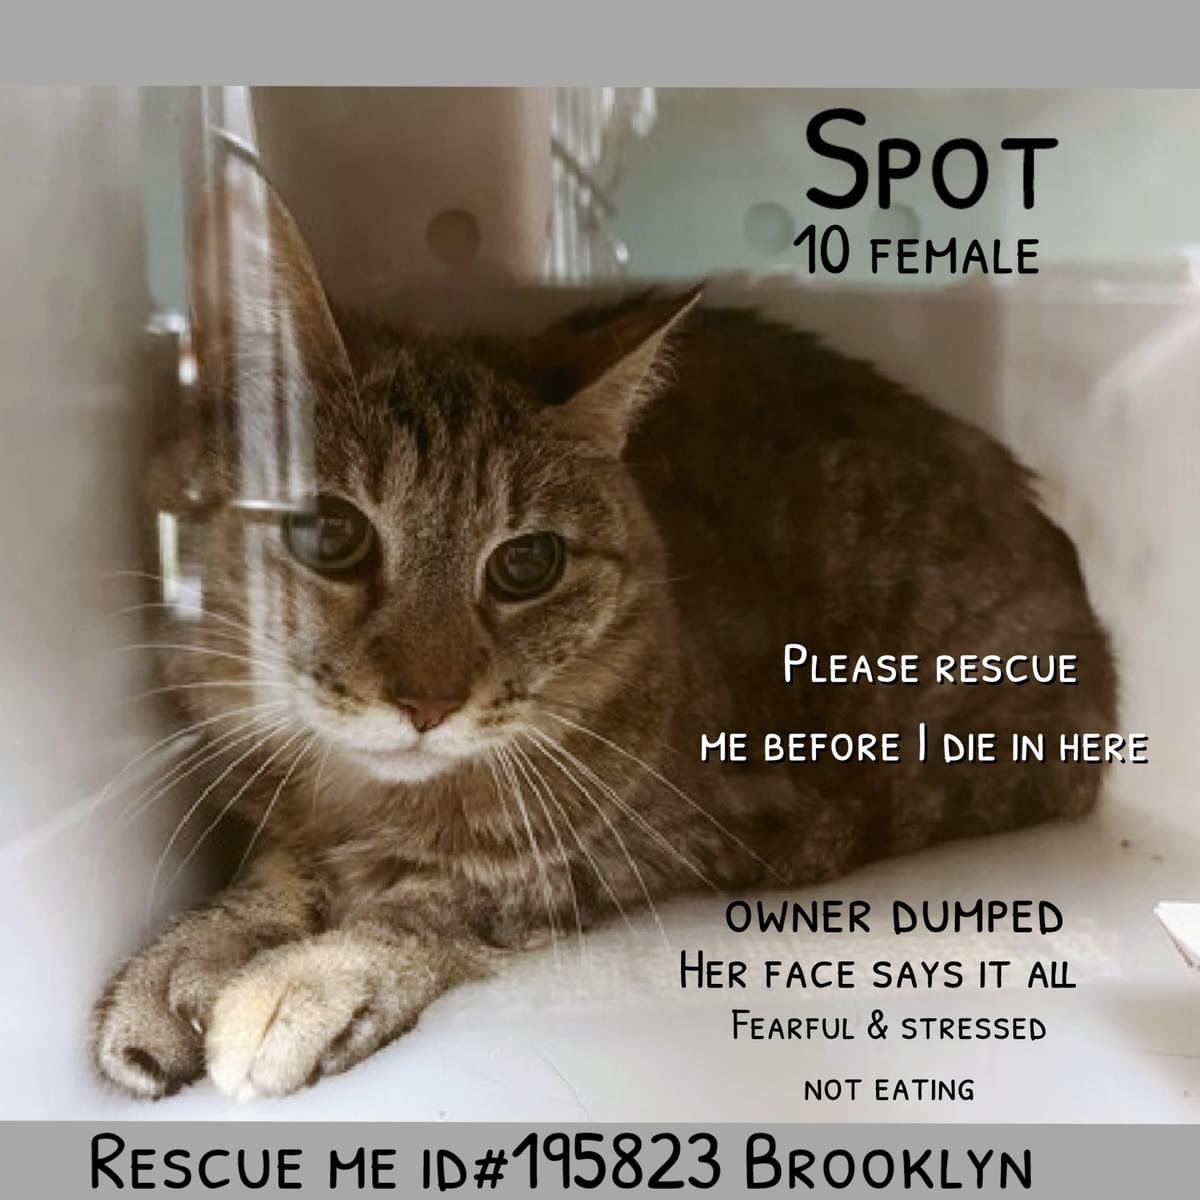 🆘Please RT-adopt-foster! 🆘 SPOT is on the “emergency placement” list at #ACCNYC and needs out of the shelter by 12 NOON 5/2! #URGENT #NYC #CATS #NYCACC #TeamKittySOS #AdoptDontShop #CatsOfTwitter newhope.shelterbuddy.com/Animal/Profile…